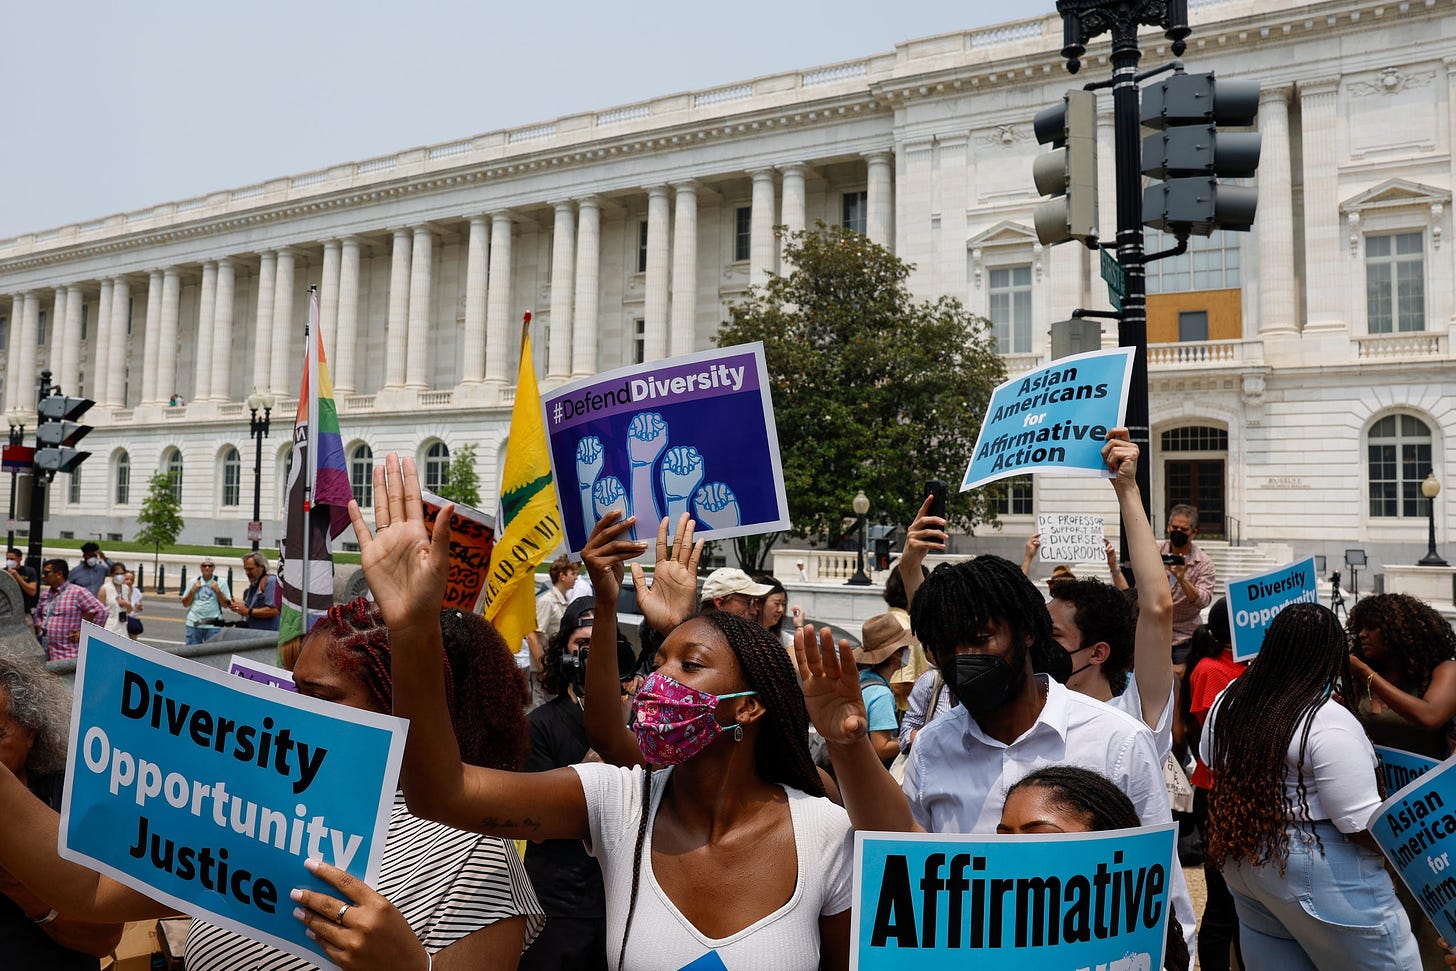 Supporters of affirmative action protest near the U.S. Supreme Court Building on Capitol Hill on June 29, 2023 in Washington, DC. In a 6-3 vote, Supreme Court Justices ruled that race-conscious admissions programs at Harvard and the University of North Carolina are unconstitutional, setting precedent for affirmative action in other universities and colleges.